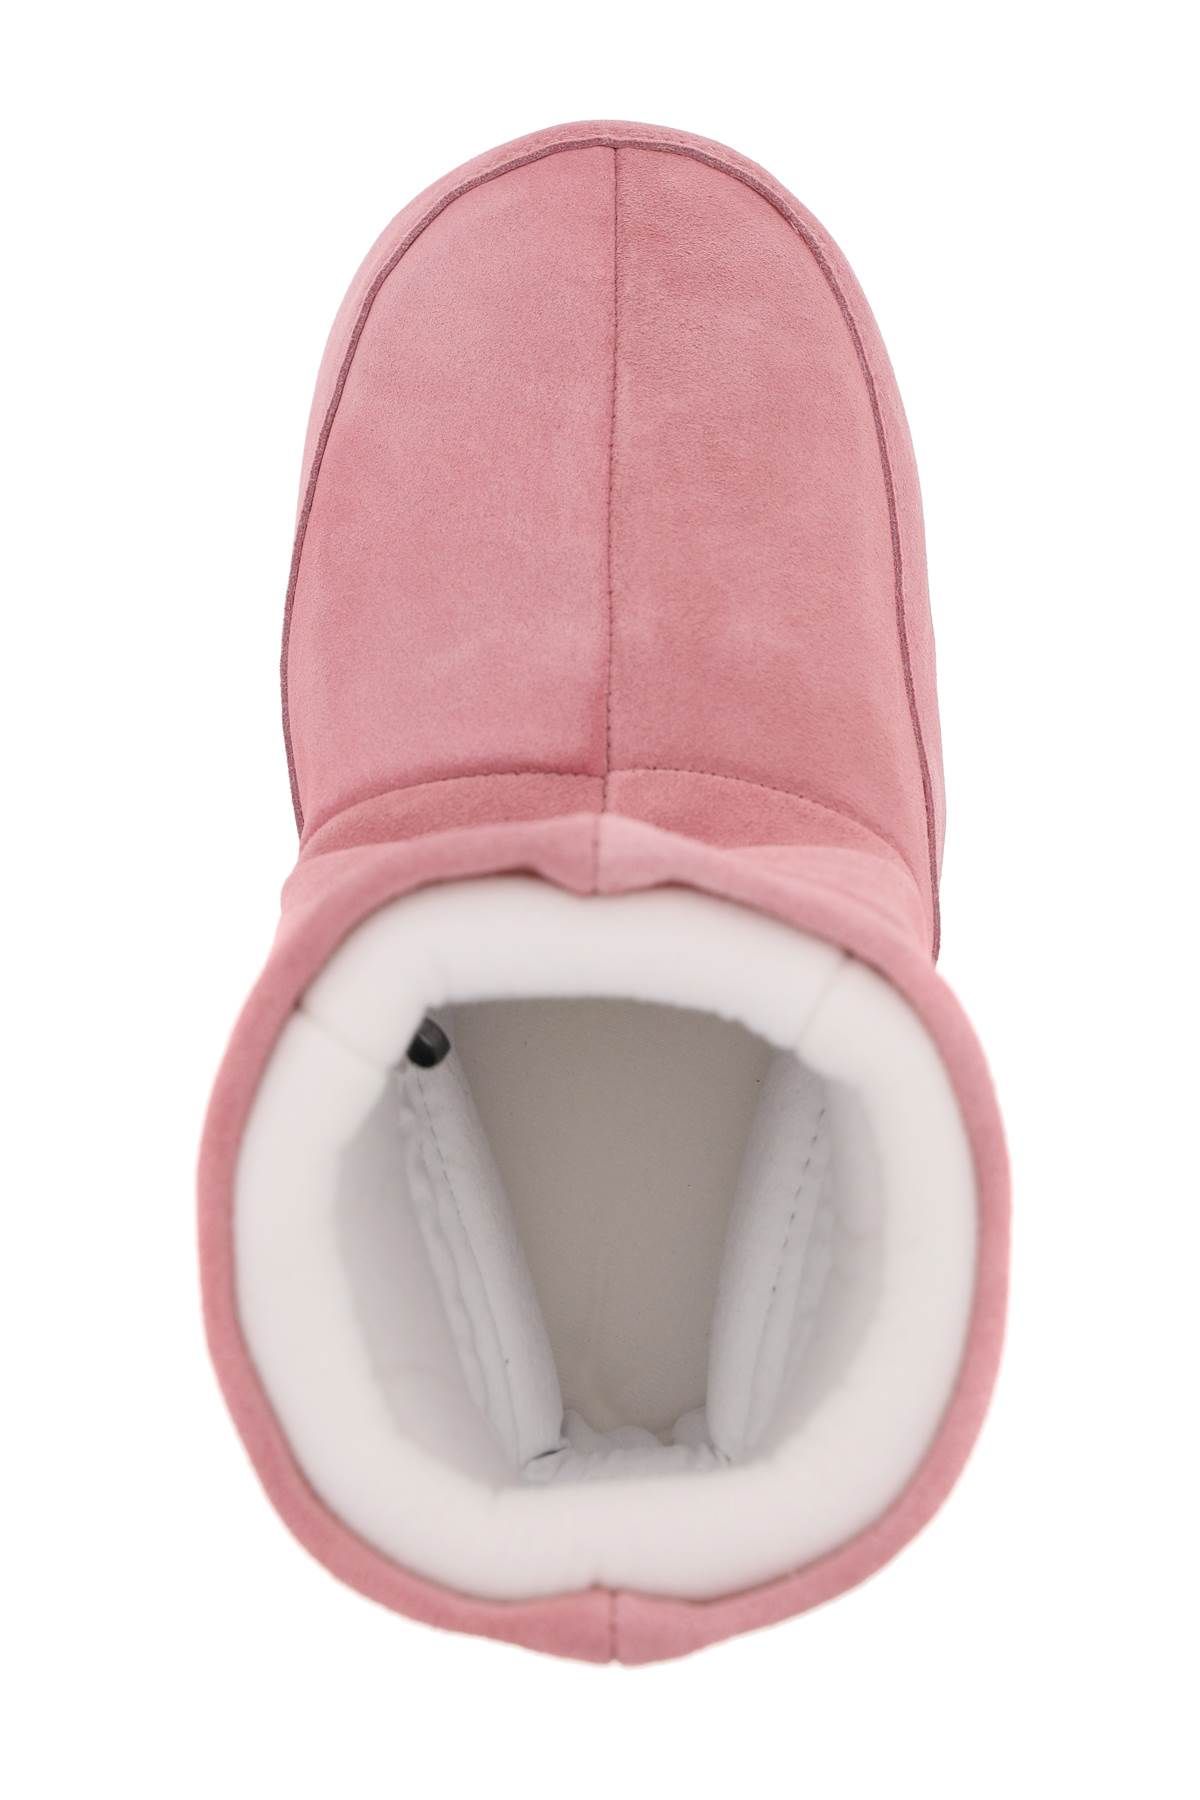 Shop Moon Boot Icon Low Suede Snow Boots In Pink